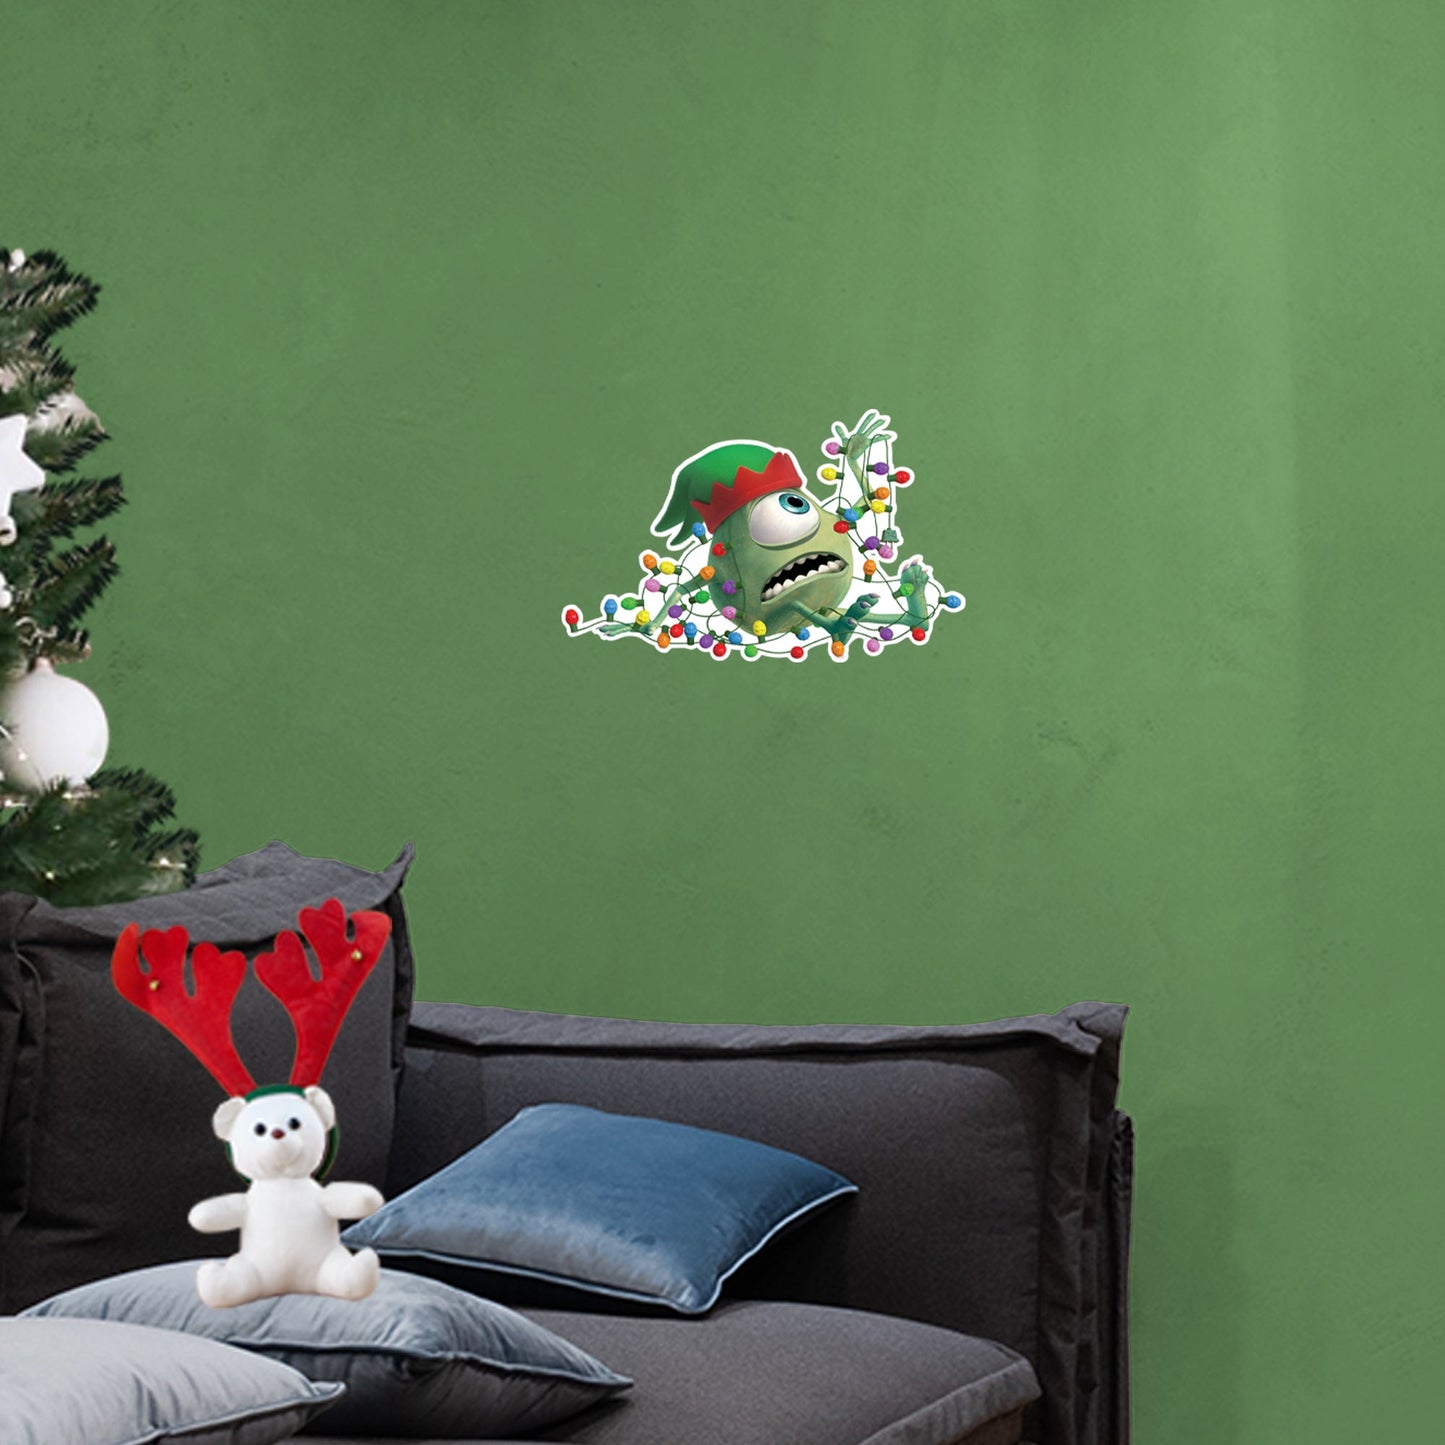 Pixar Holiday: Mike Wazowski Lights RealBig - Officially Licensed Disney Removable Adhesive Decal